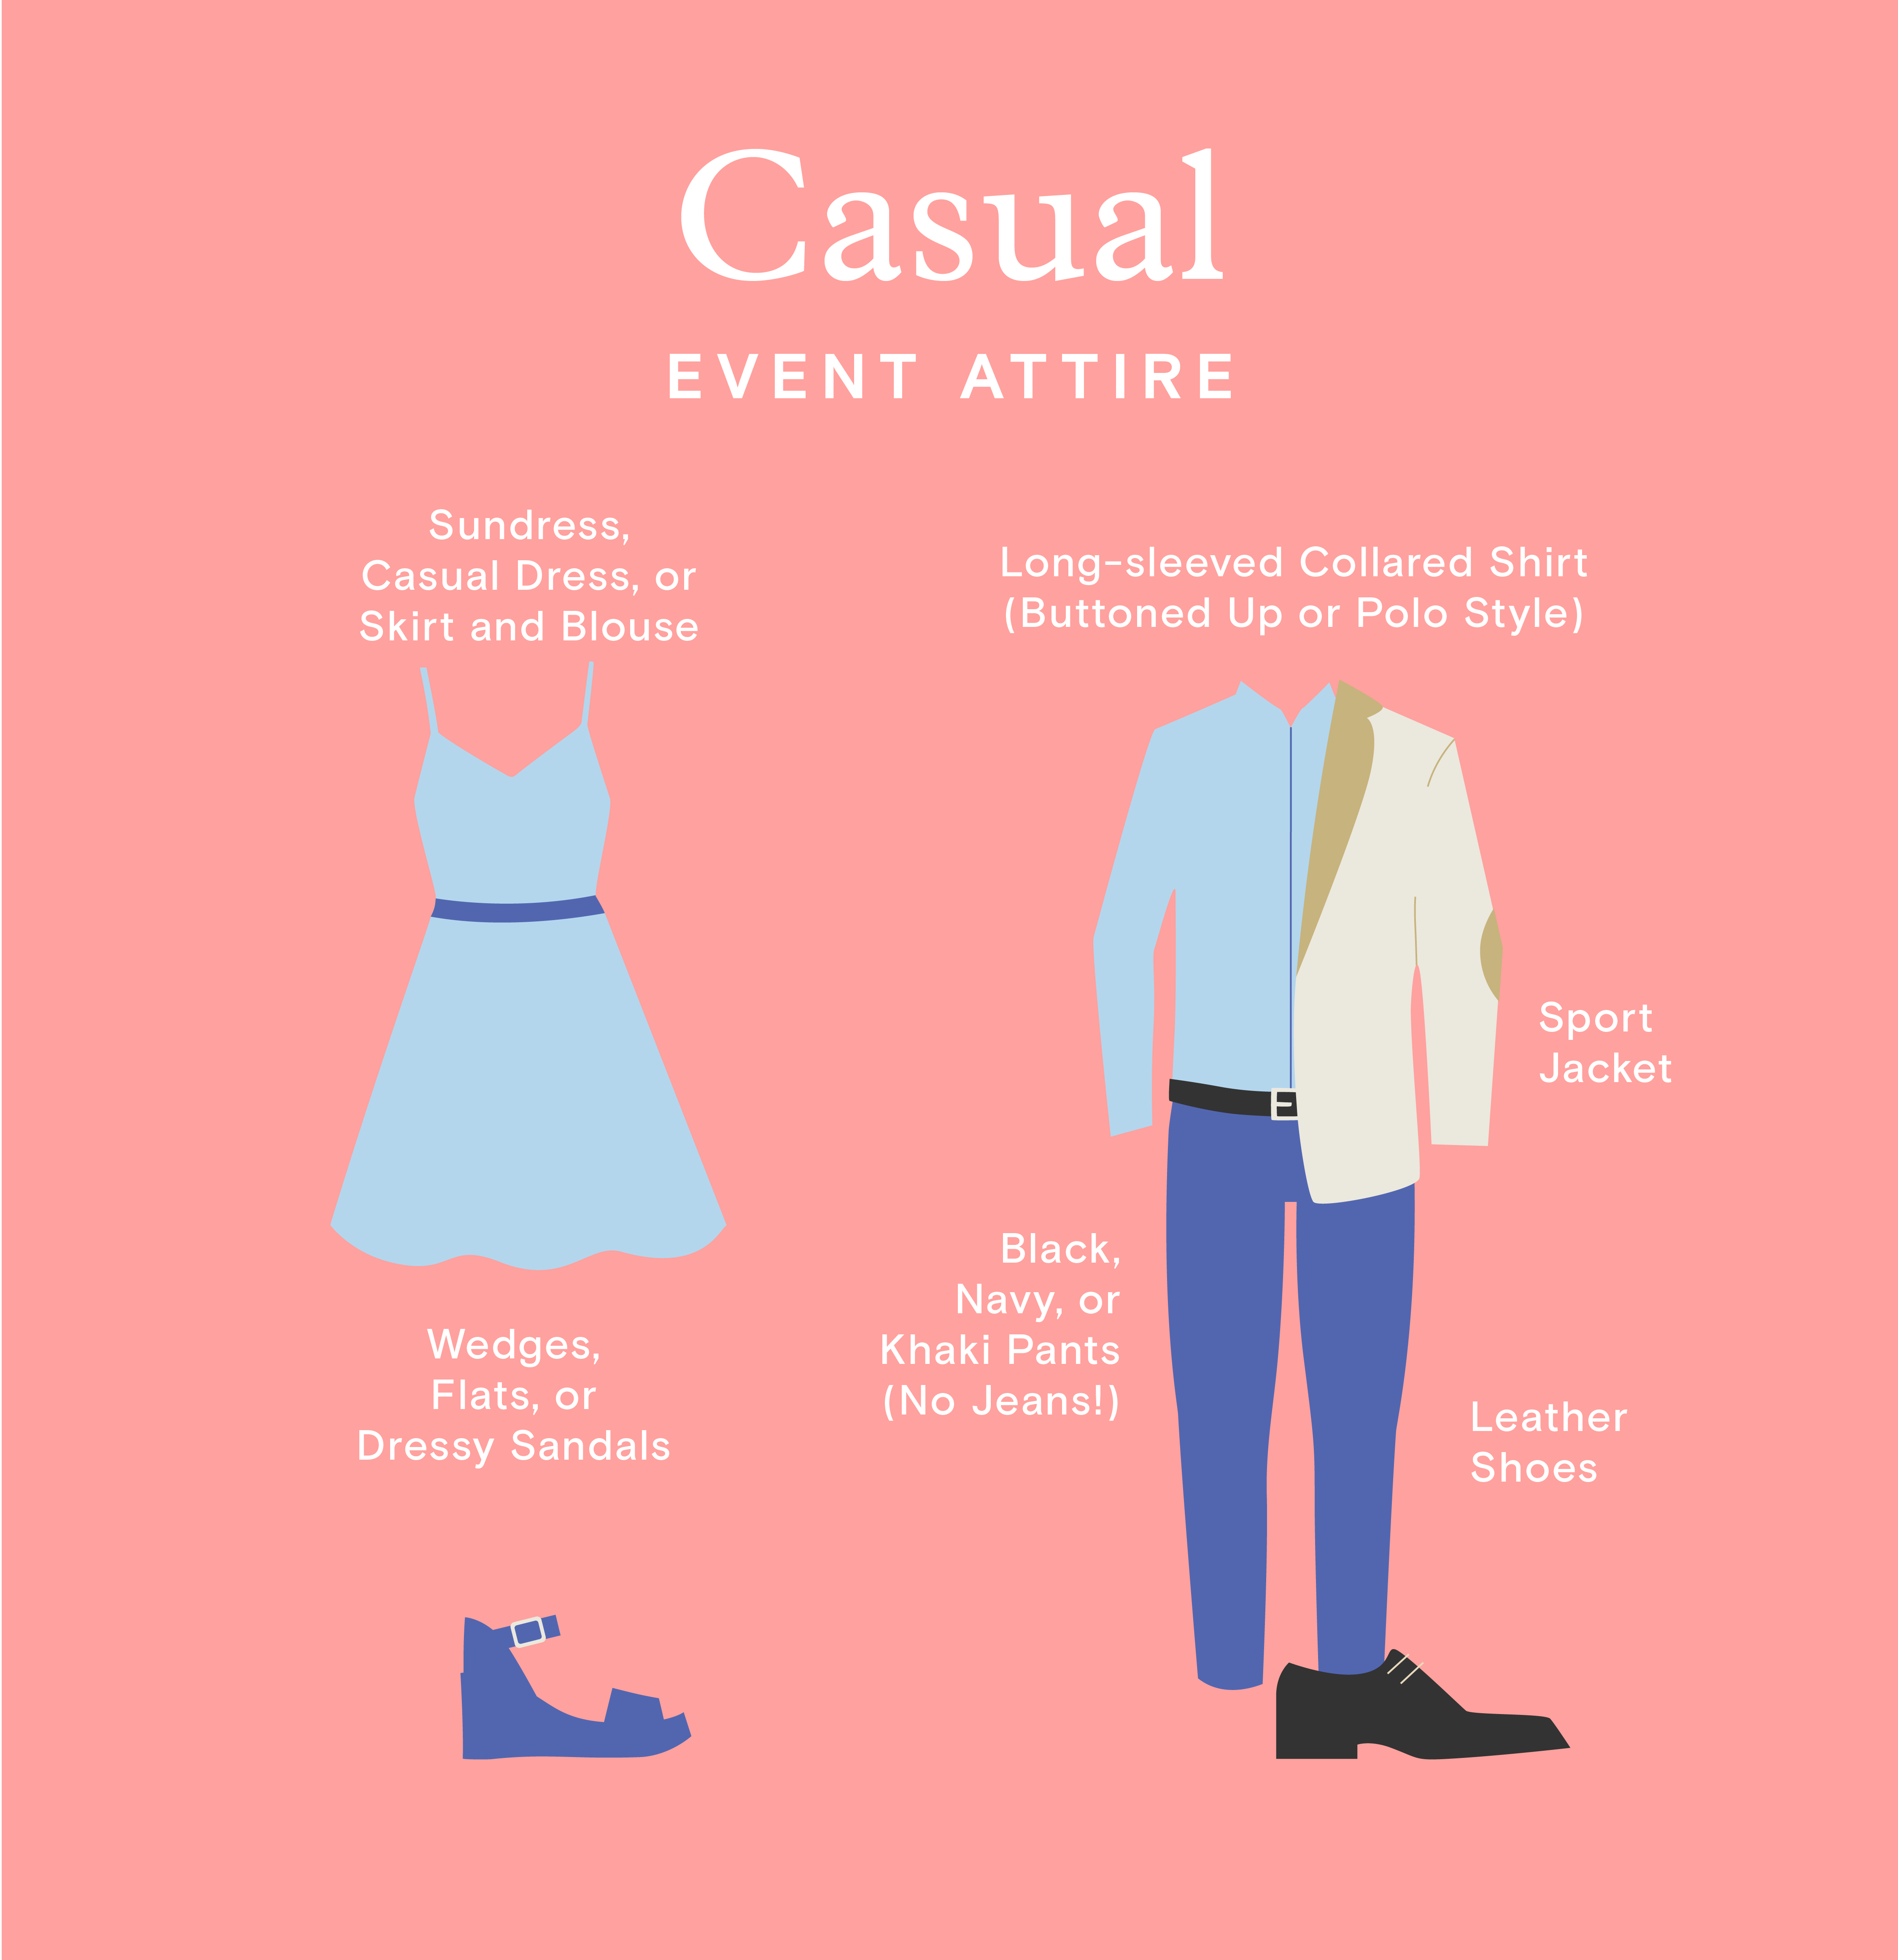 Western Formal vs. Casual: Decoding the Dress Code